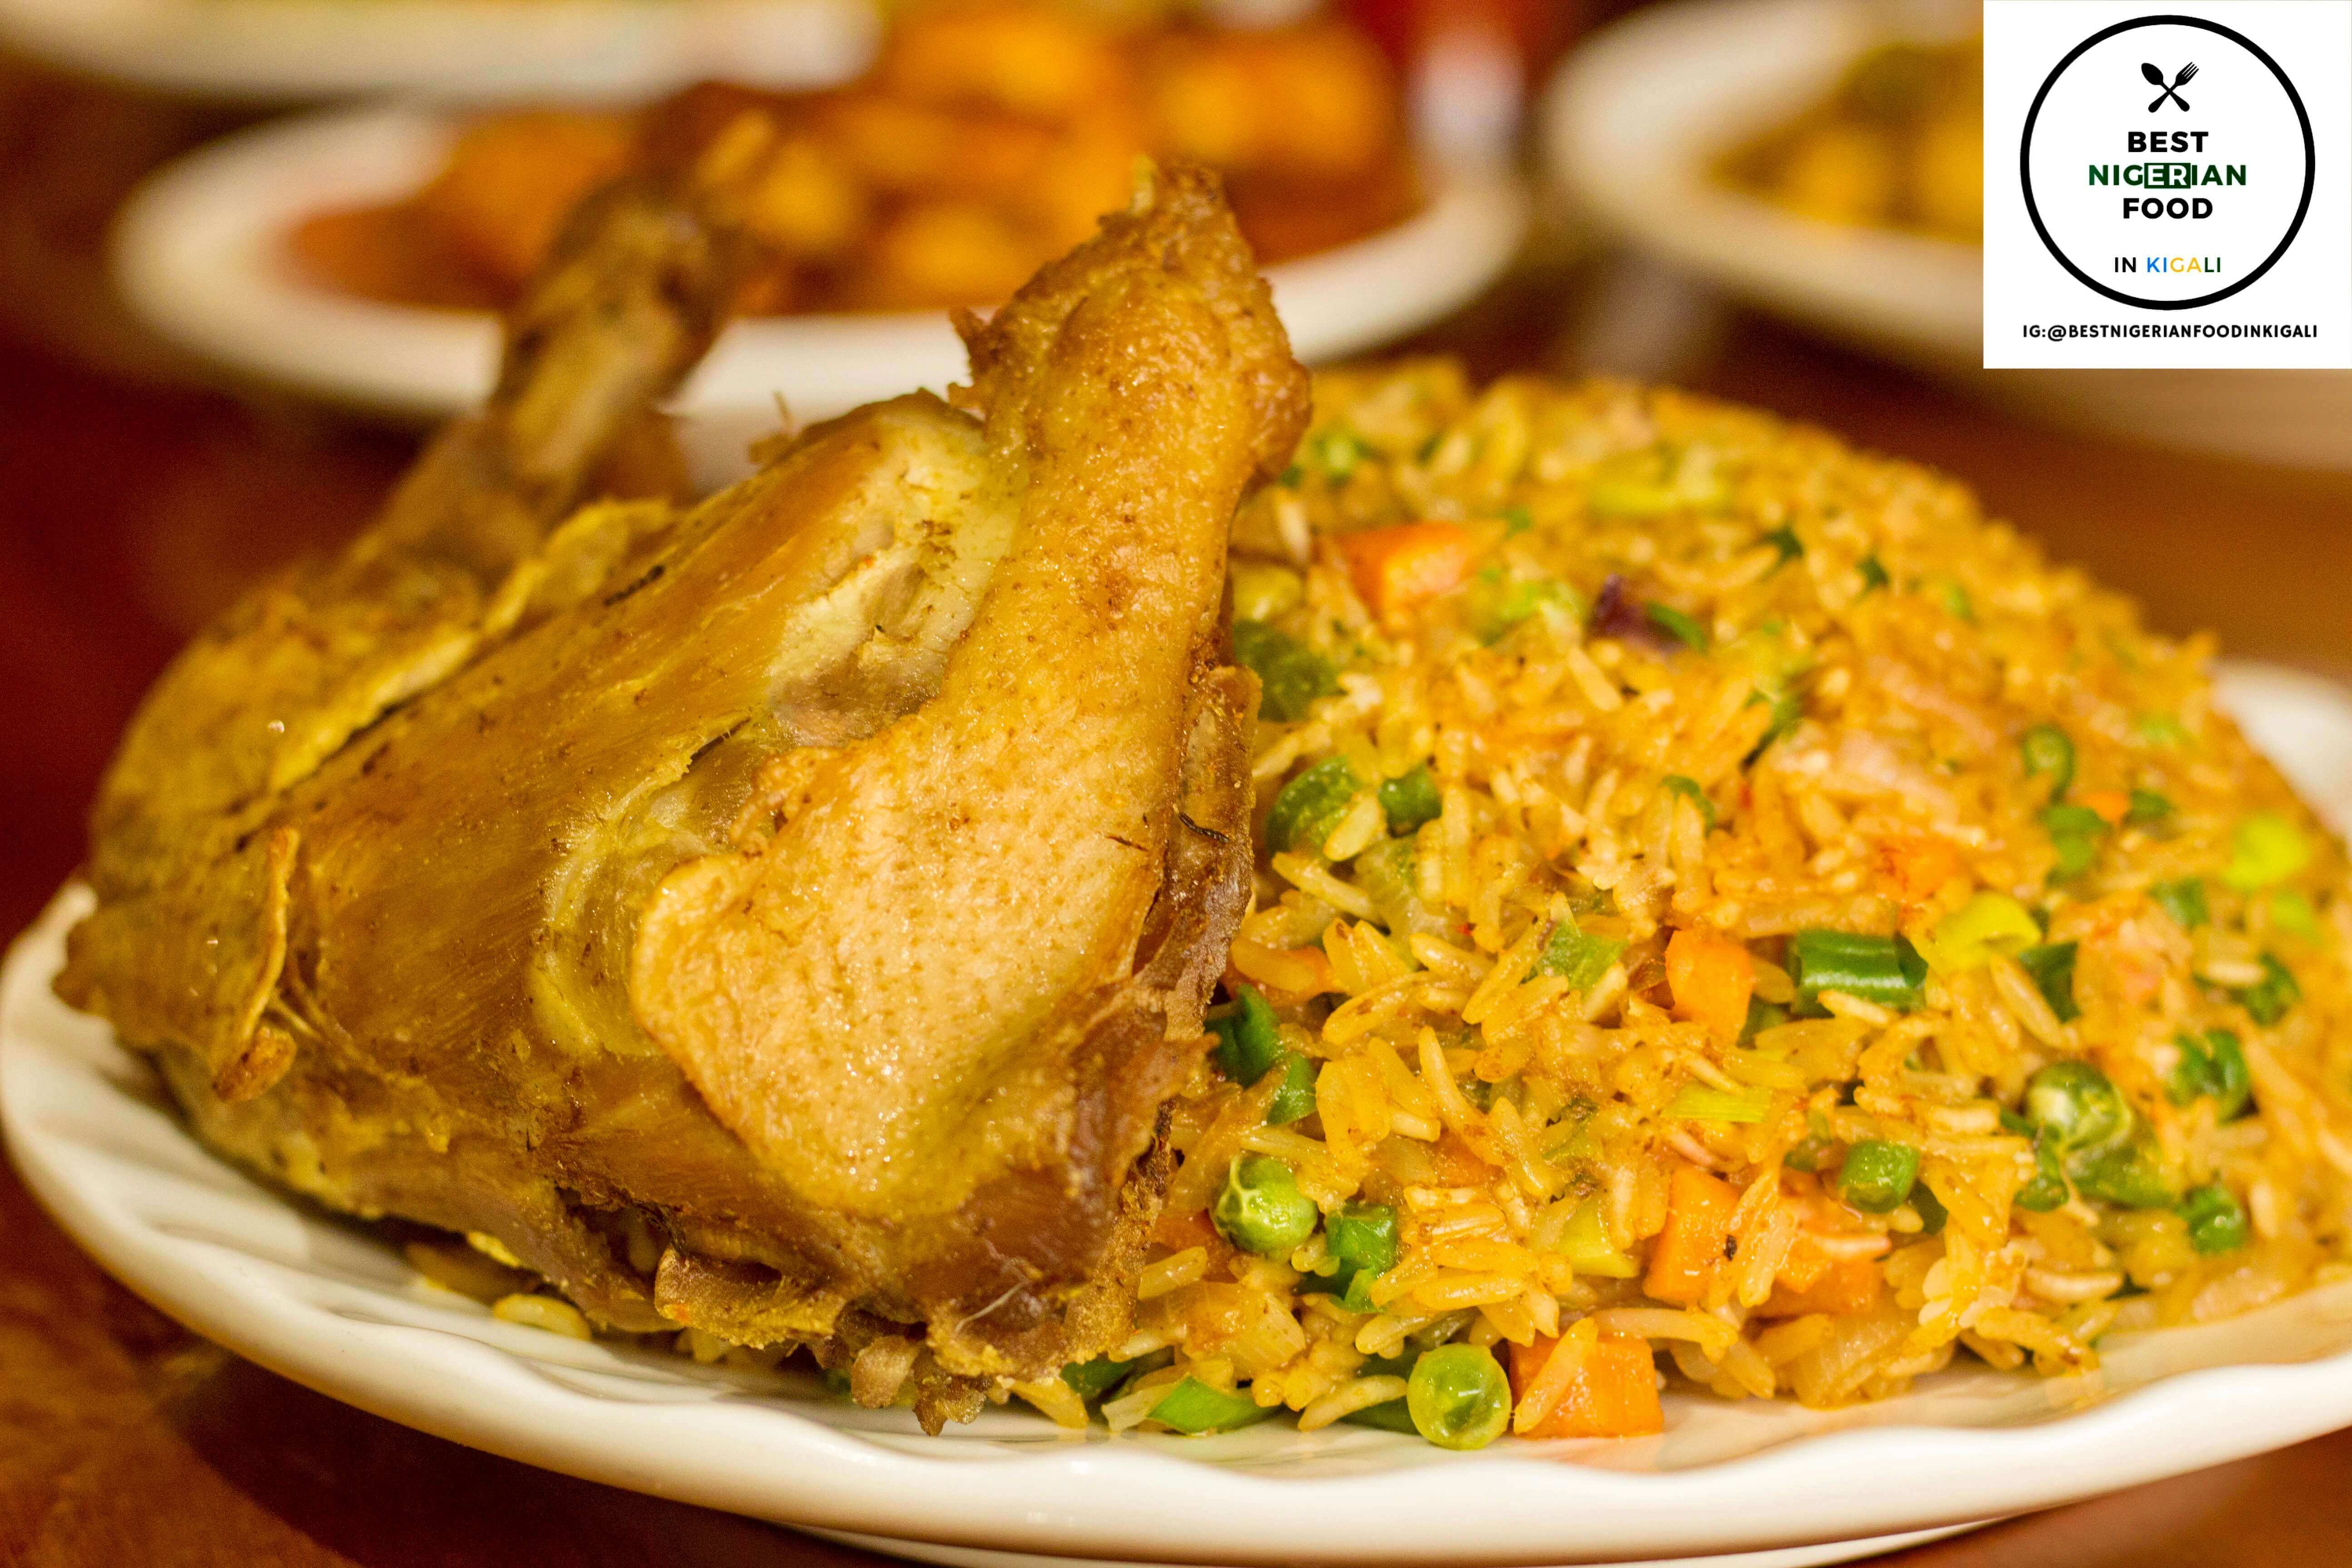 Rice in Litres (2L) Smokey Party Jollof Rice - The Best Nigerian Food in Kigali